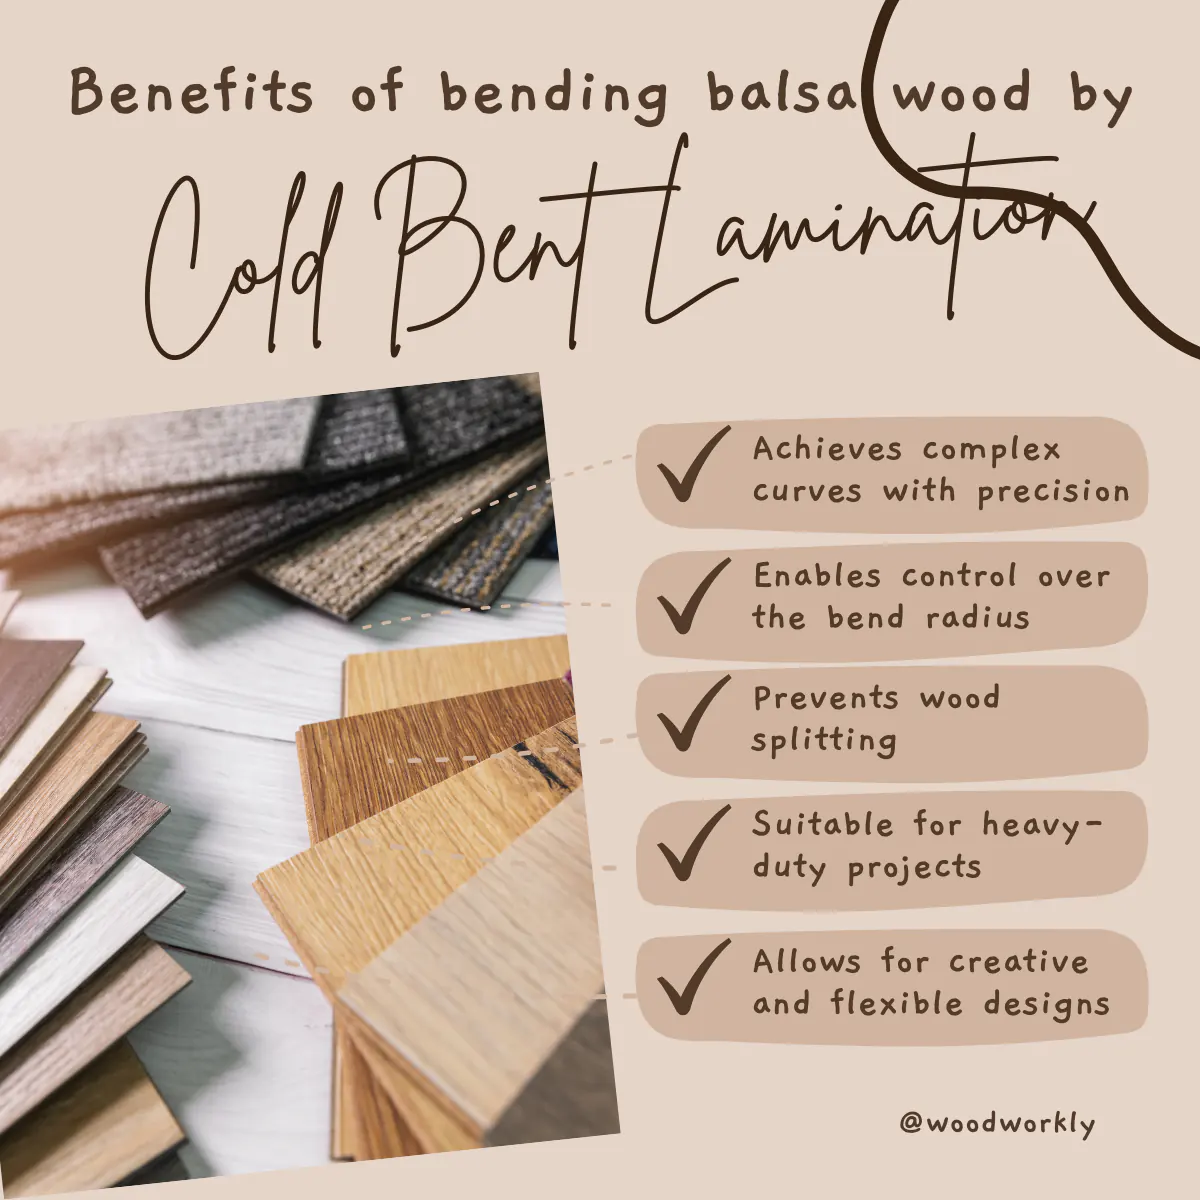 benefits of bending balsa wood by  cold bent lamination